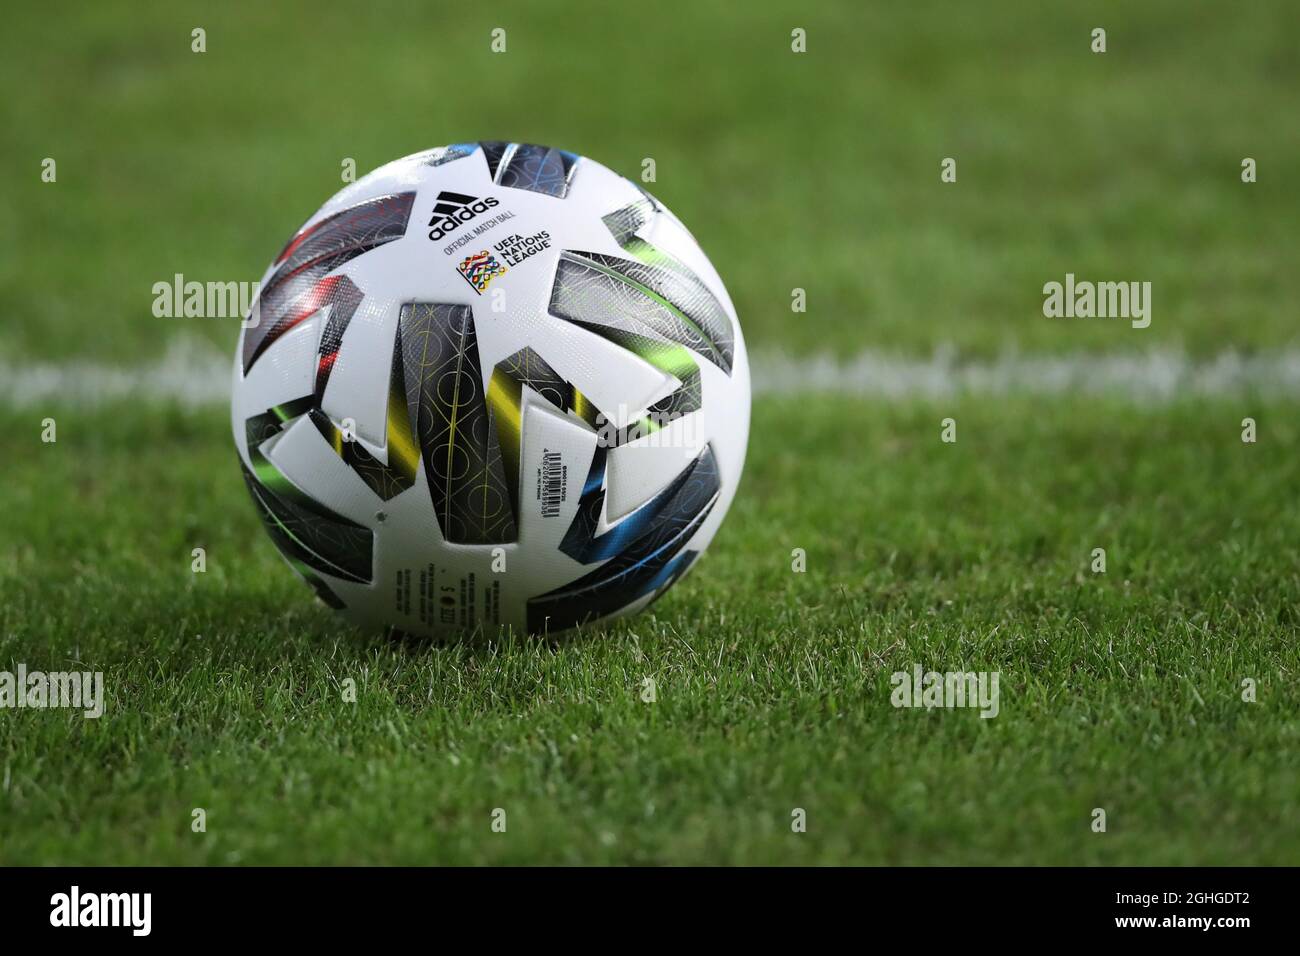 An Adidas Nations League Official matchball during the UEFA Nations League  match at Stadio Ennio Tardini,